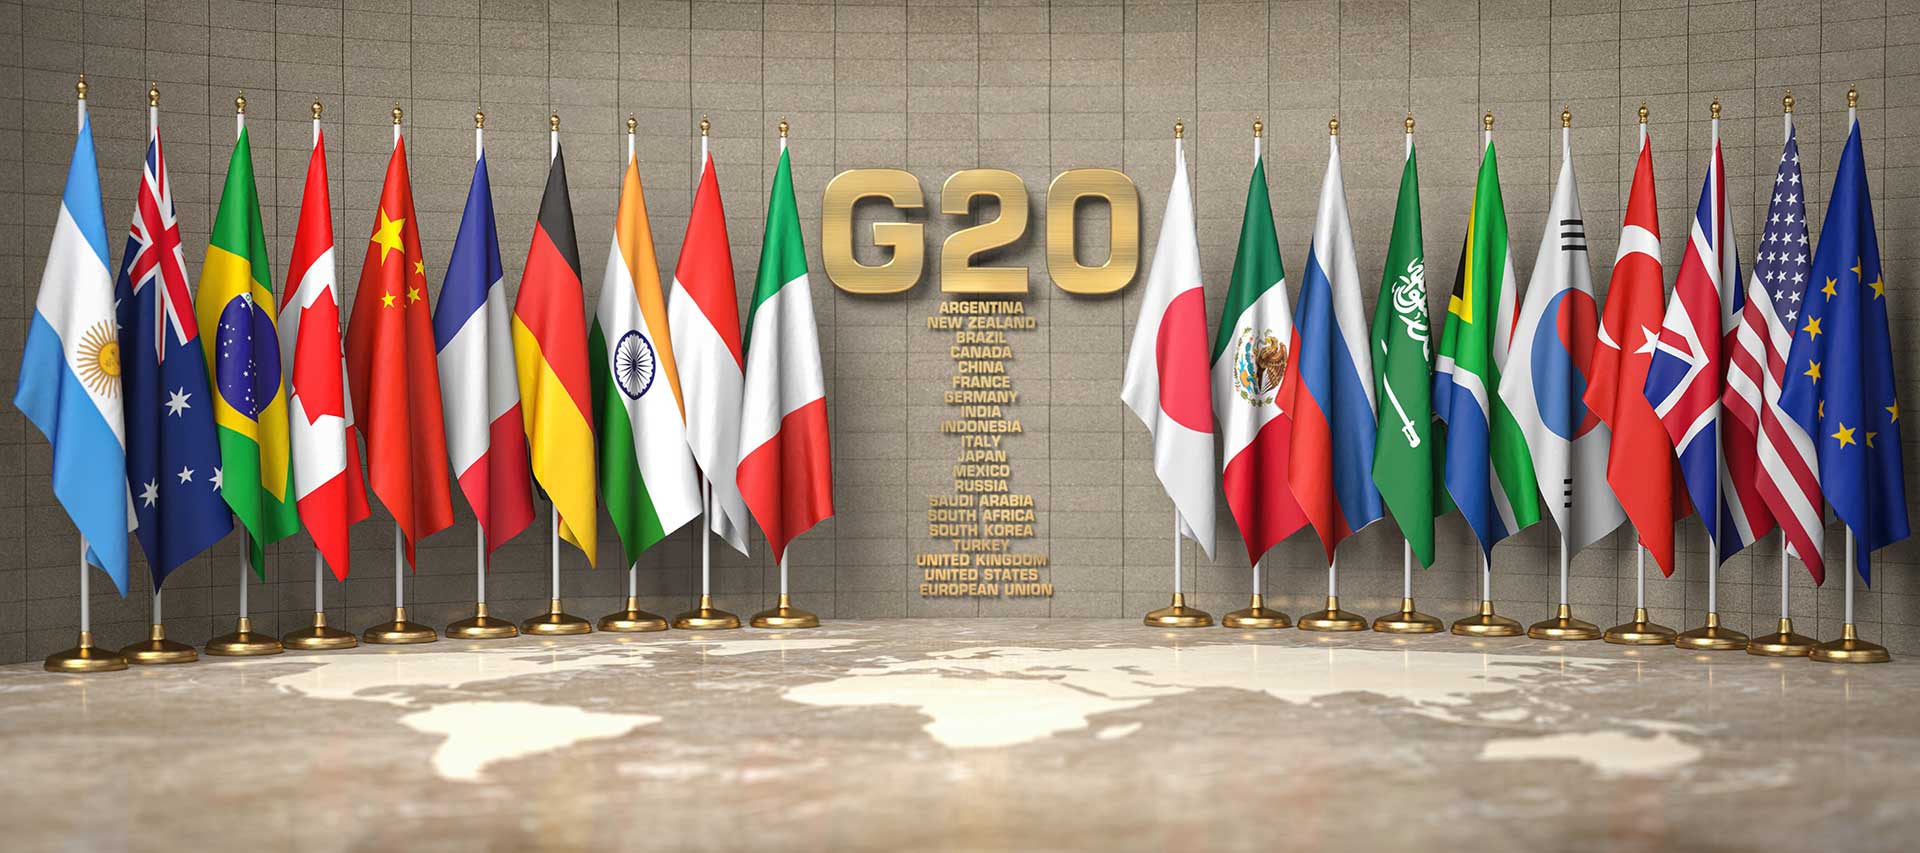 g20 1920x1080 small